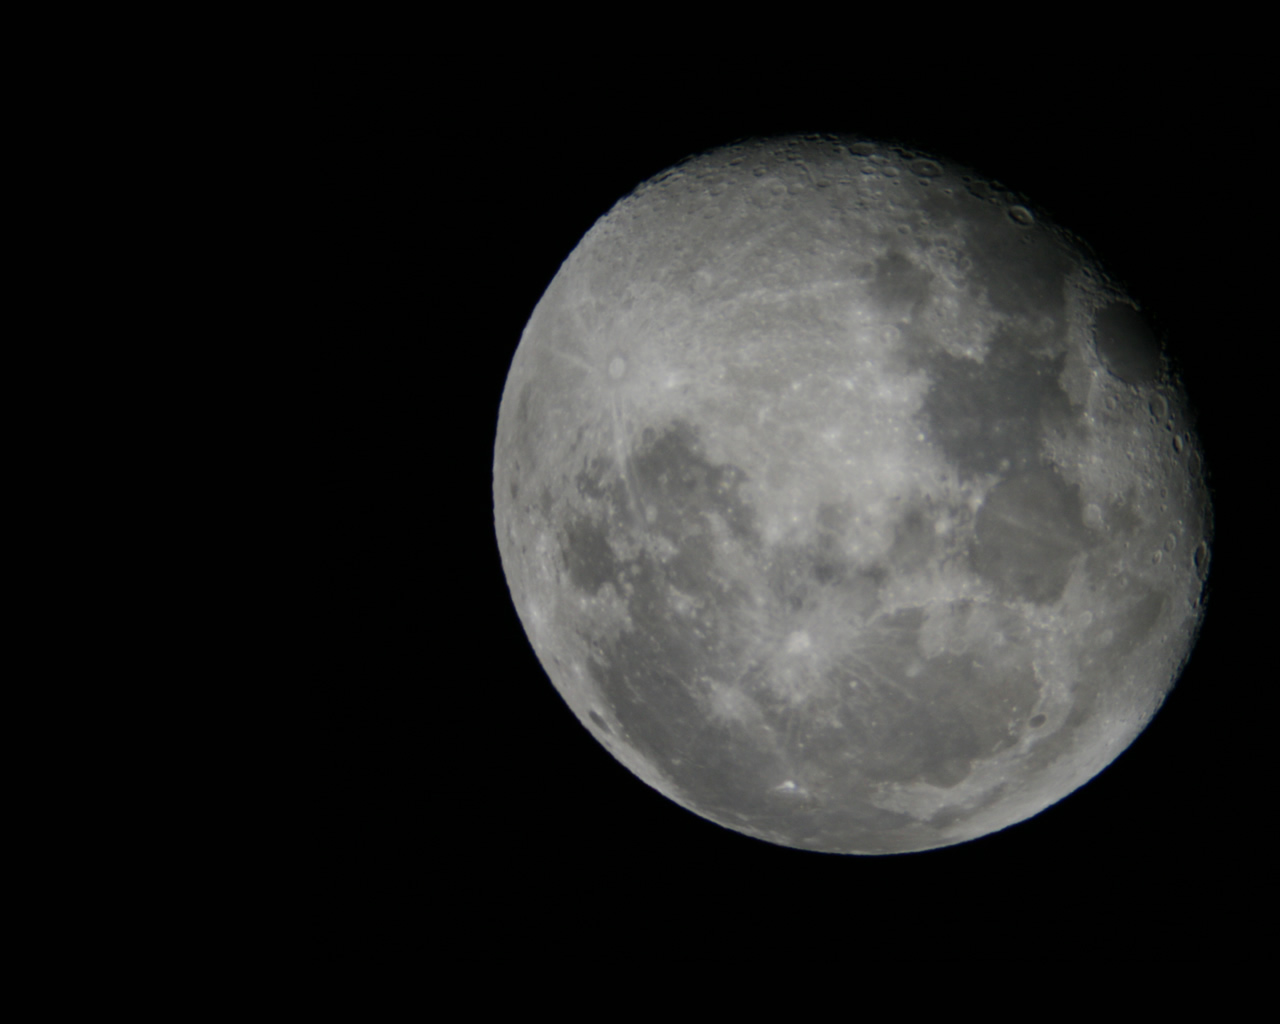 The Moon – 1280 x 1024 pixels. A shot I took of the moon using prime focus 